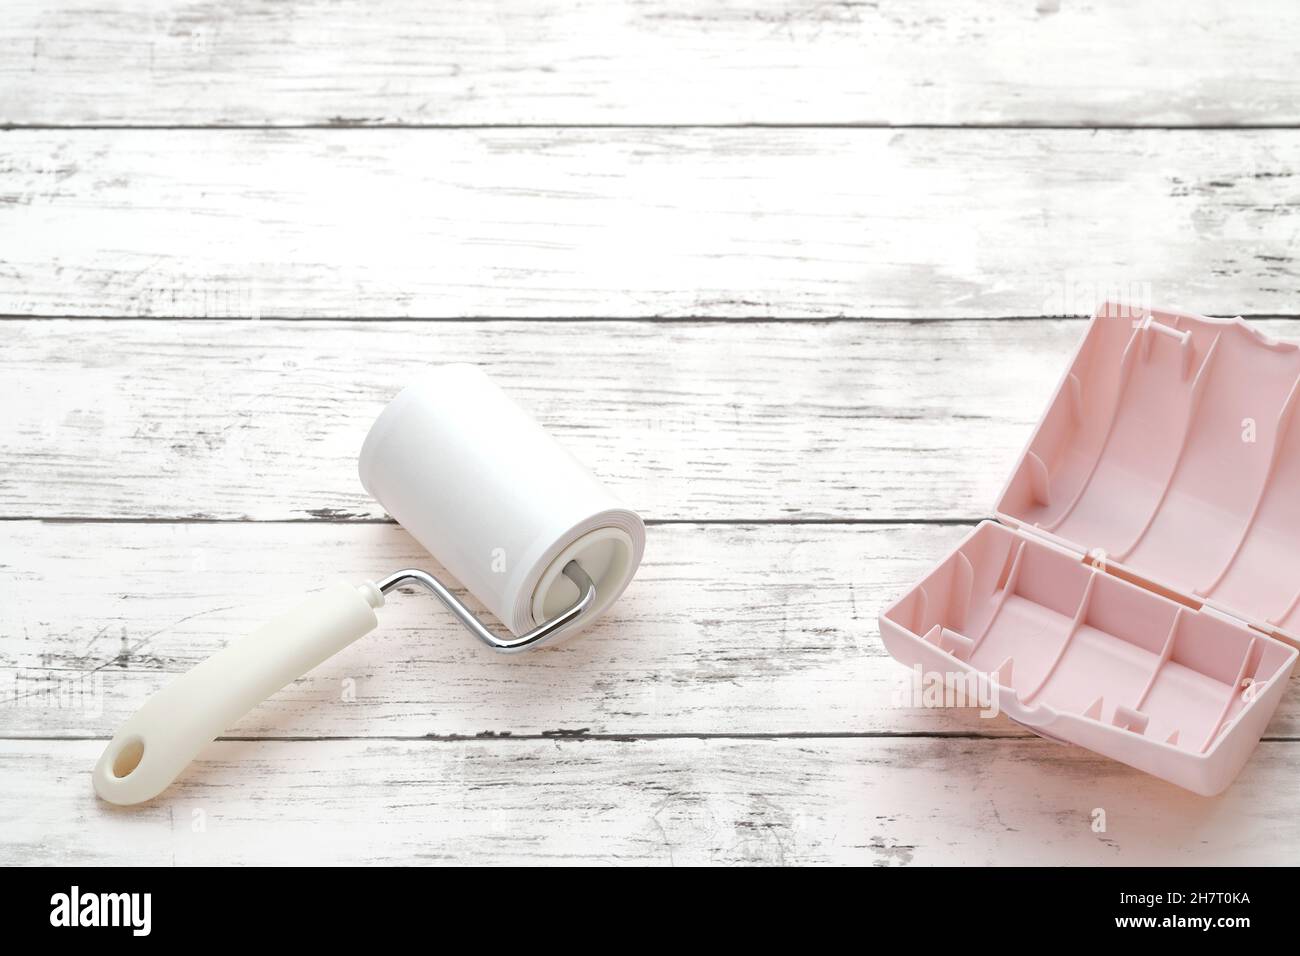 sticky roller cleaning, housework and housekeeping concept Stock Photo